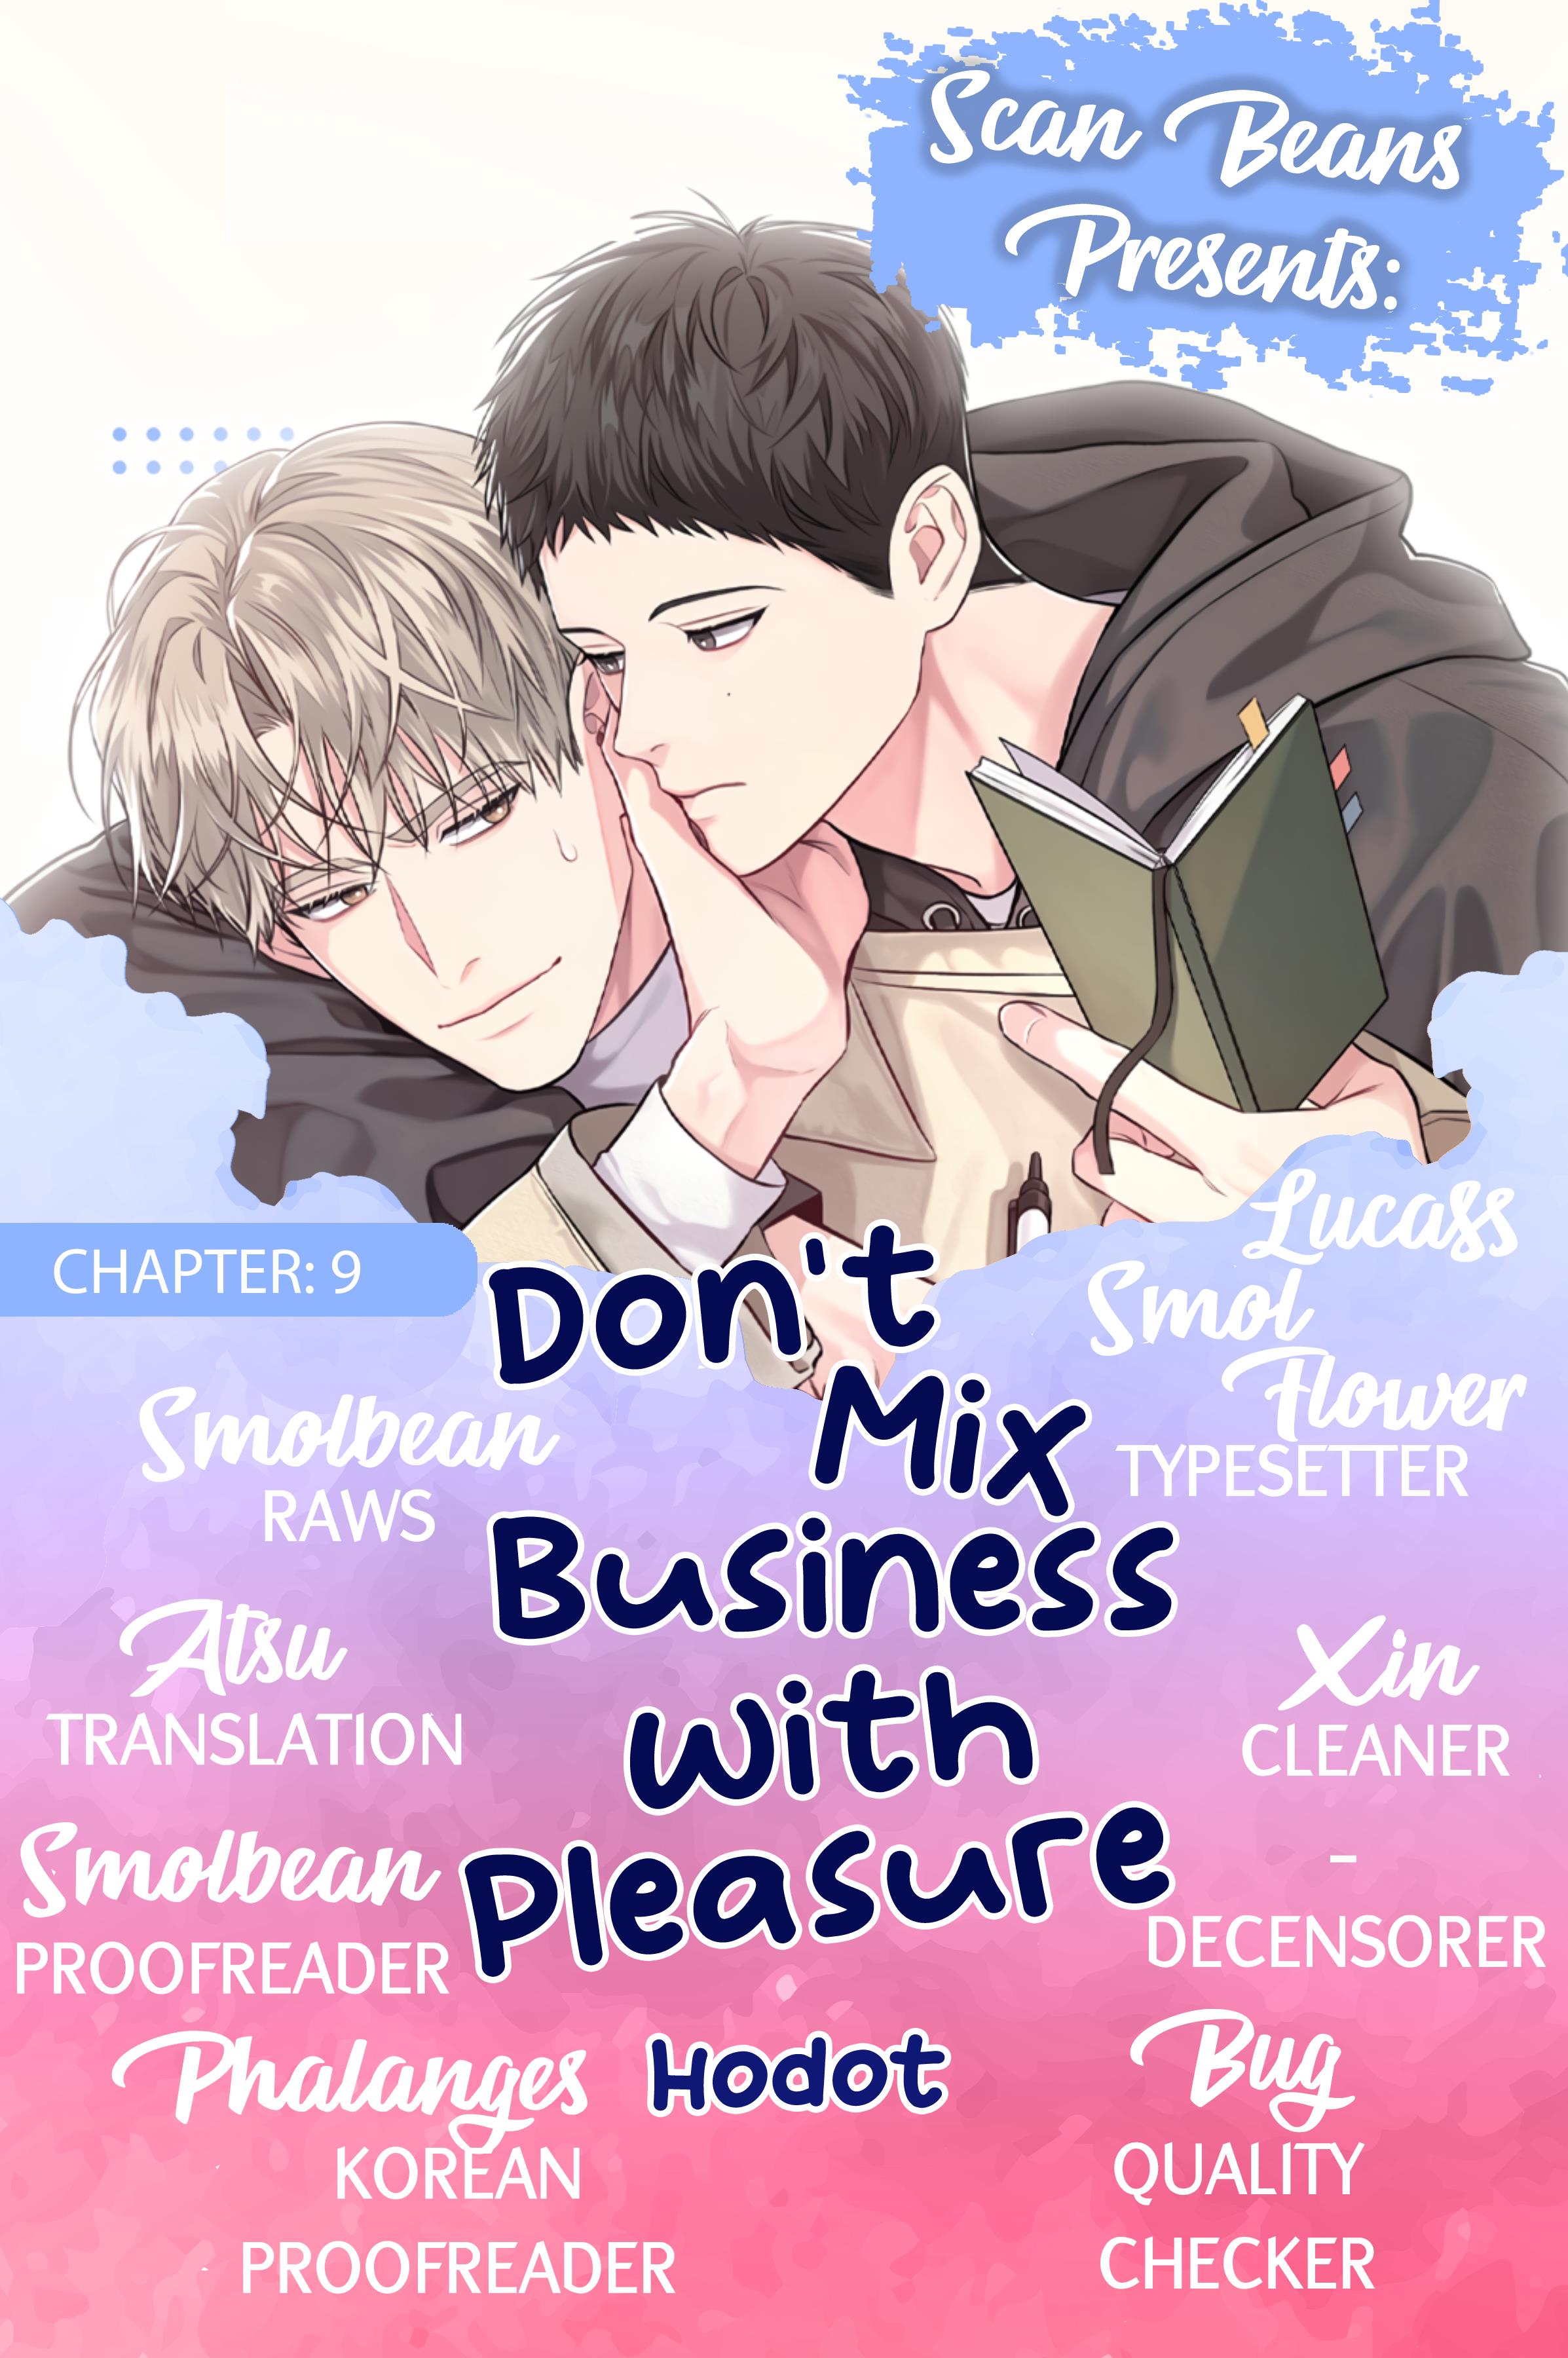 Don't Mix Business With Pleasure! - Page 2